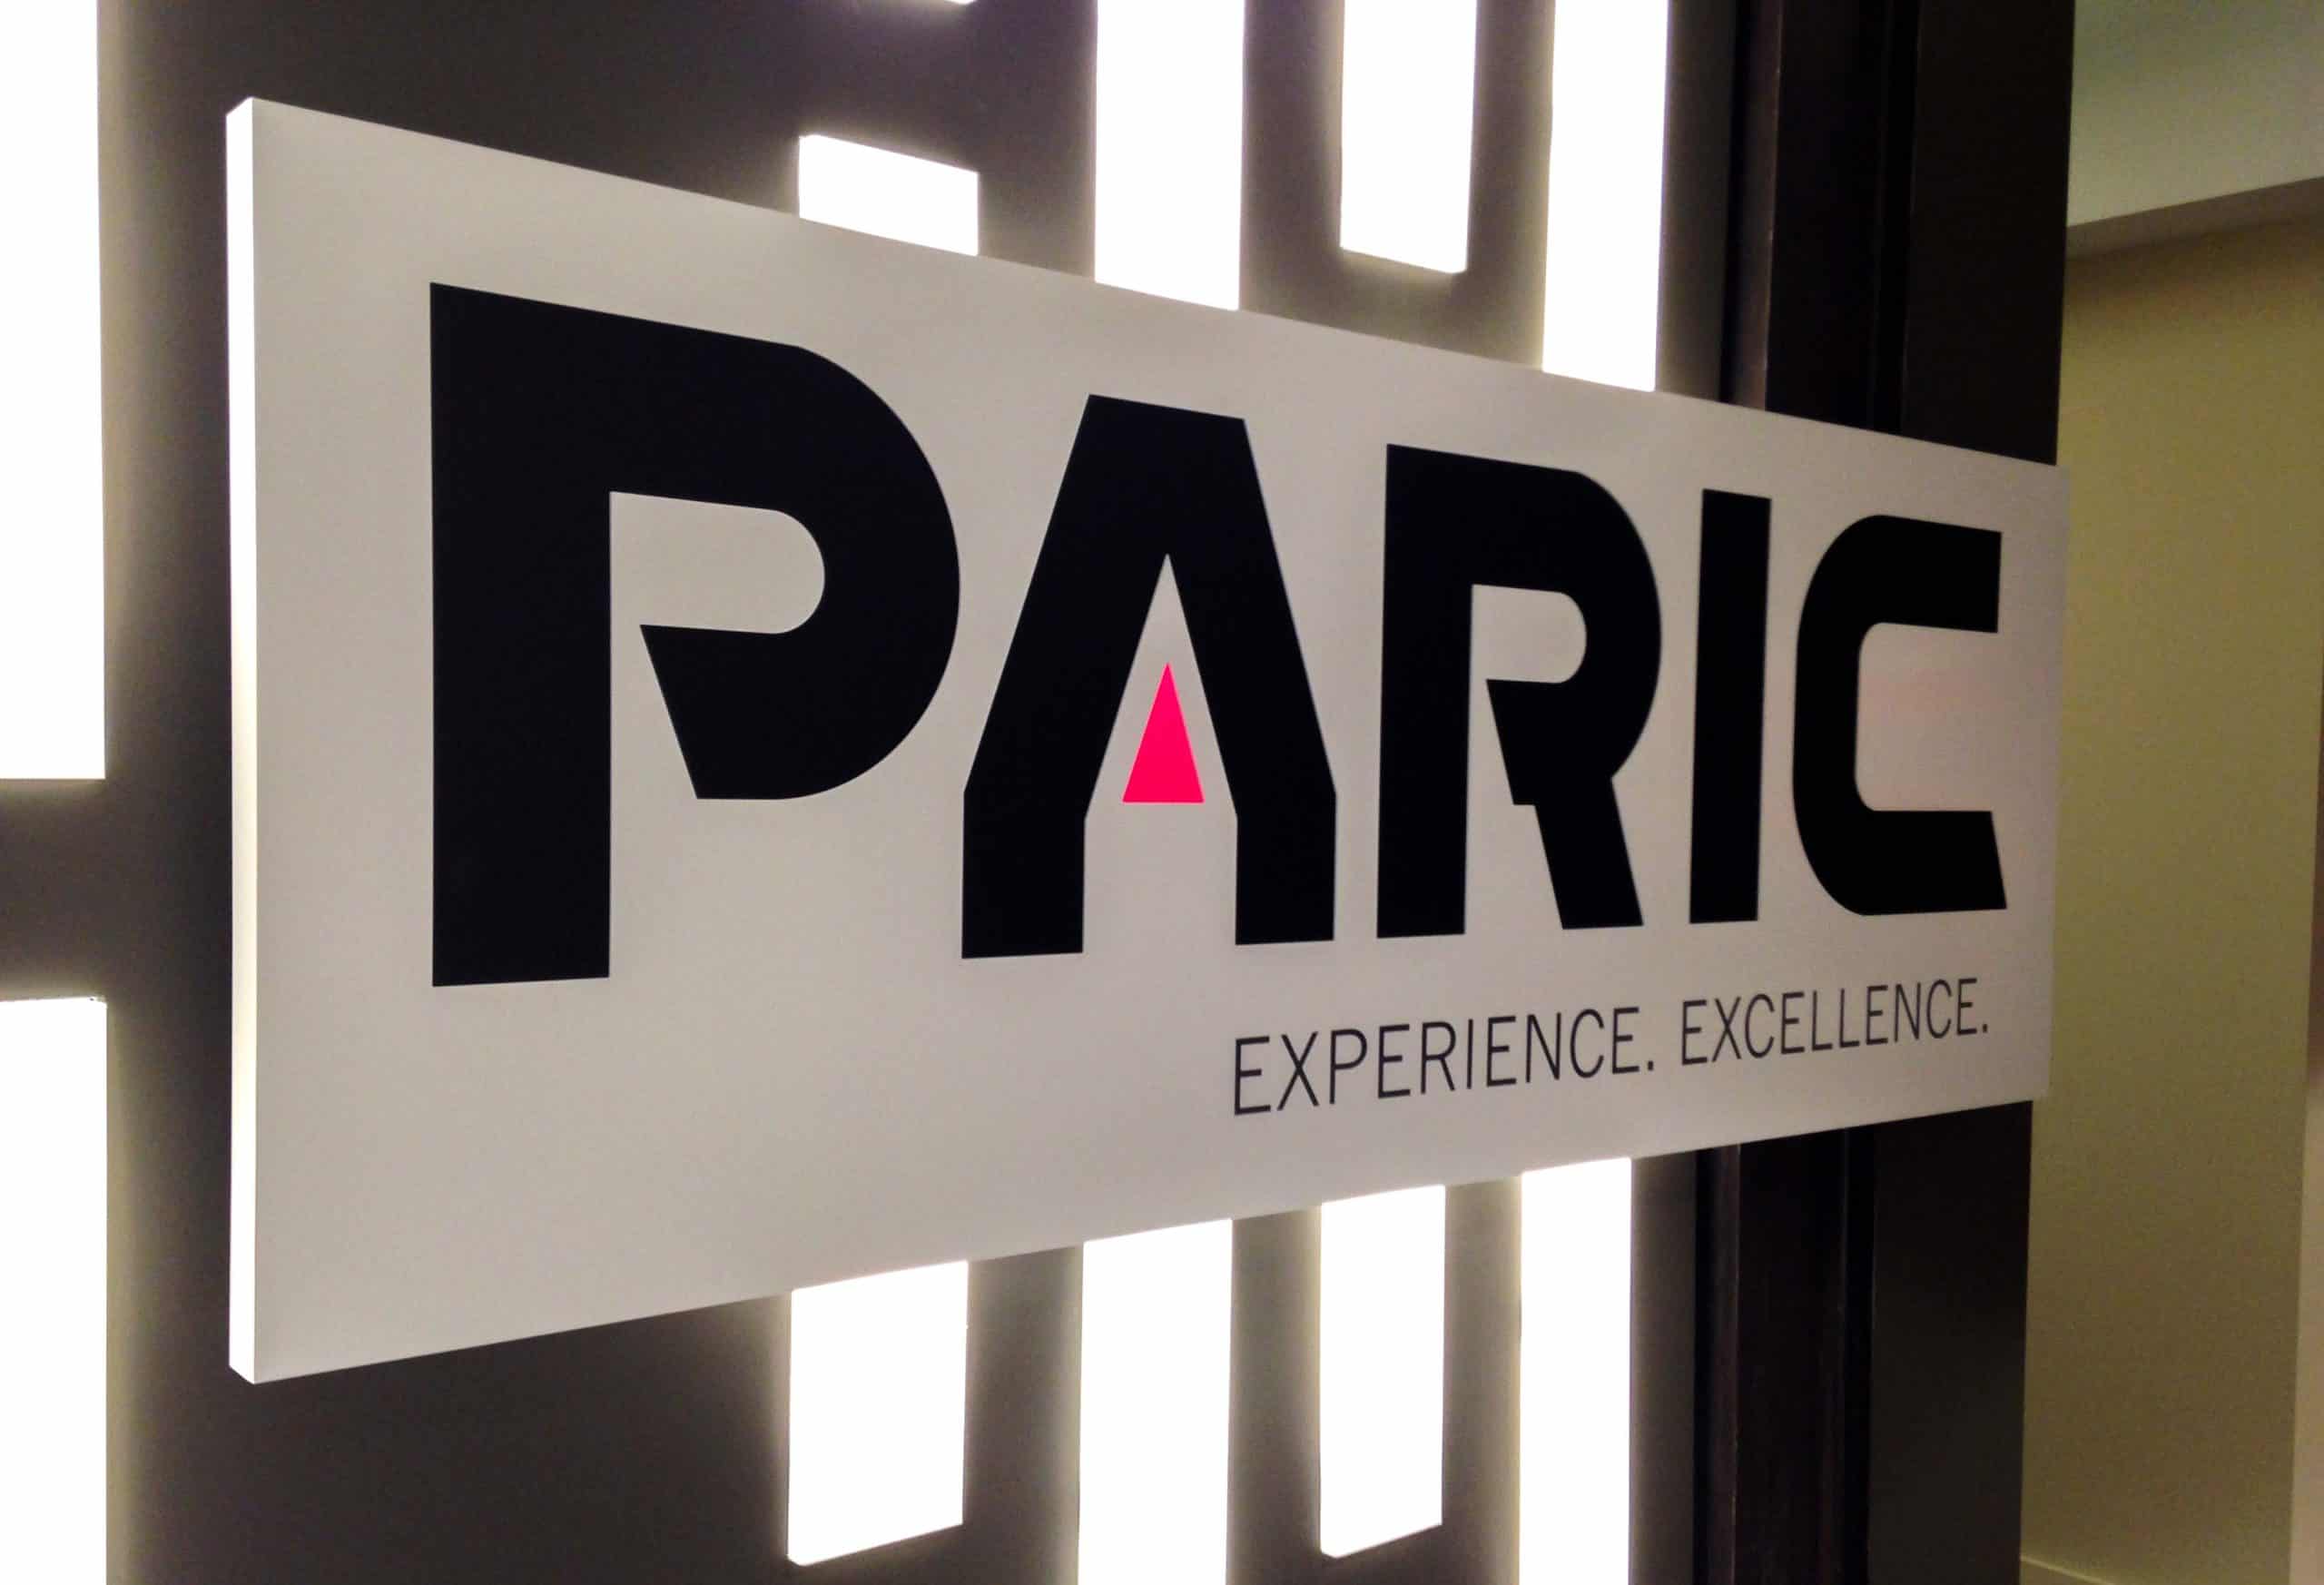 Paric panel logo sign lit with geographic lights